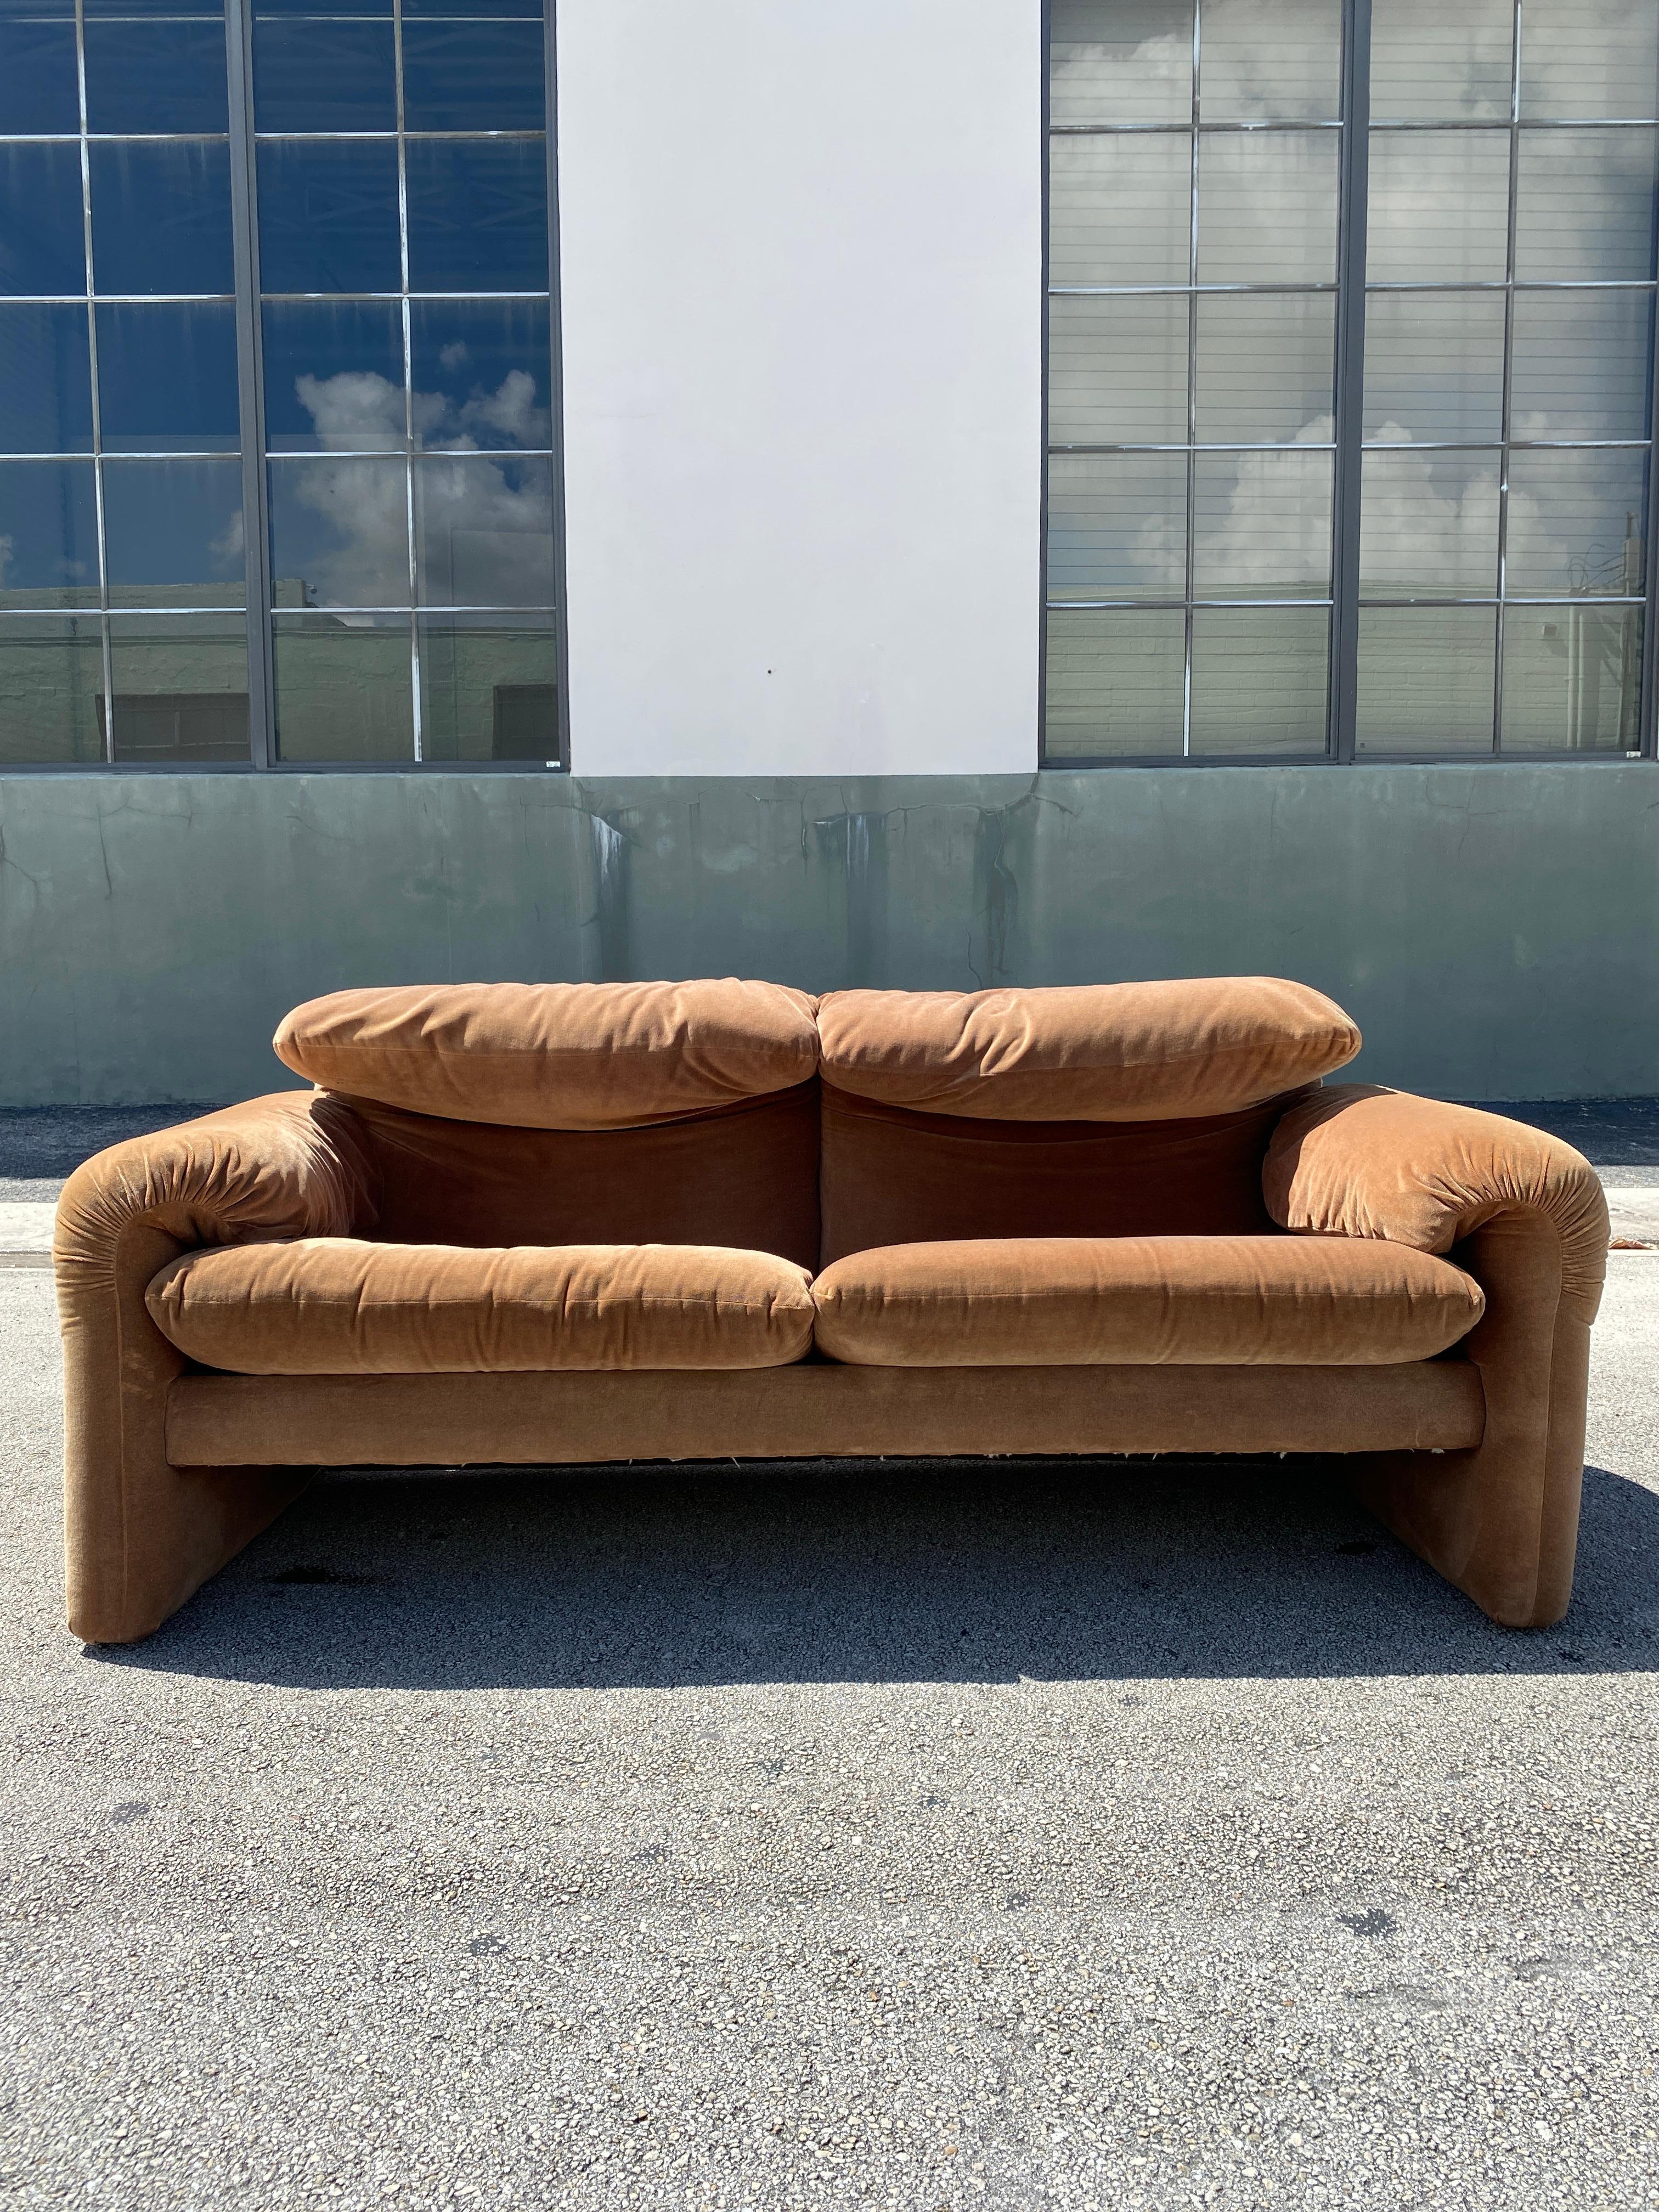 Vintage Maralunga style two seater sofas by Selig, Circa 1970s in soft brown cotton velvet.

Fabric is in good vintage condition, with even mild sun discoloration. Video available upon request.

Measures: 67” W x 30.5” D x 29” H x 17”Seat H x